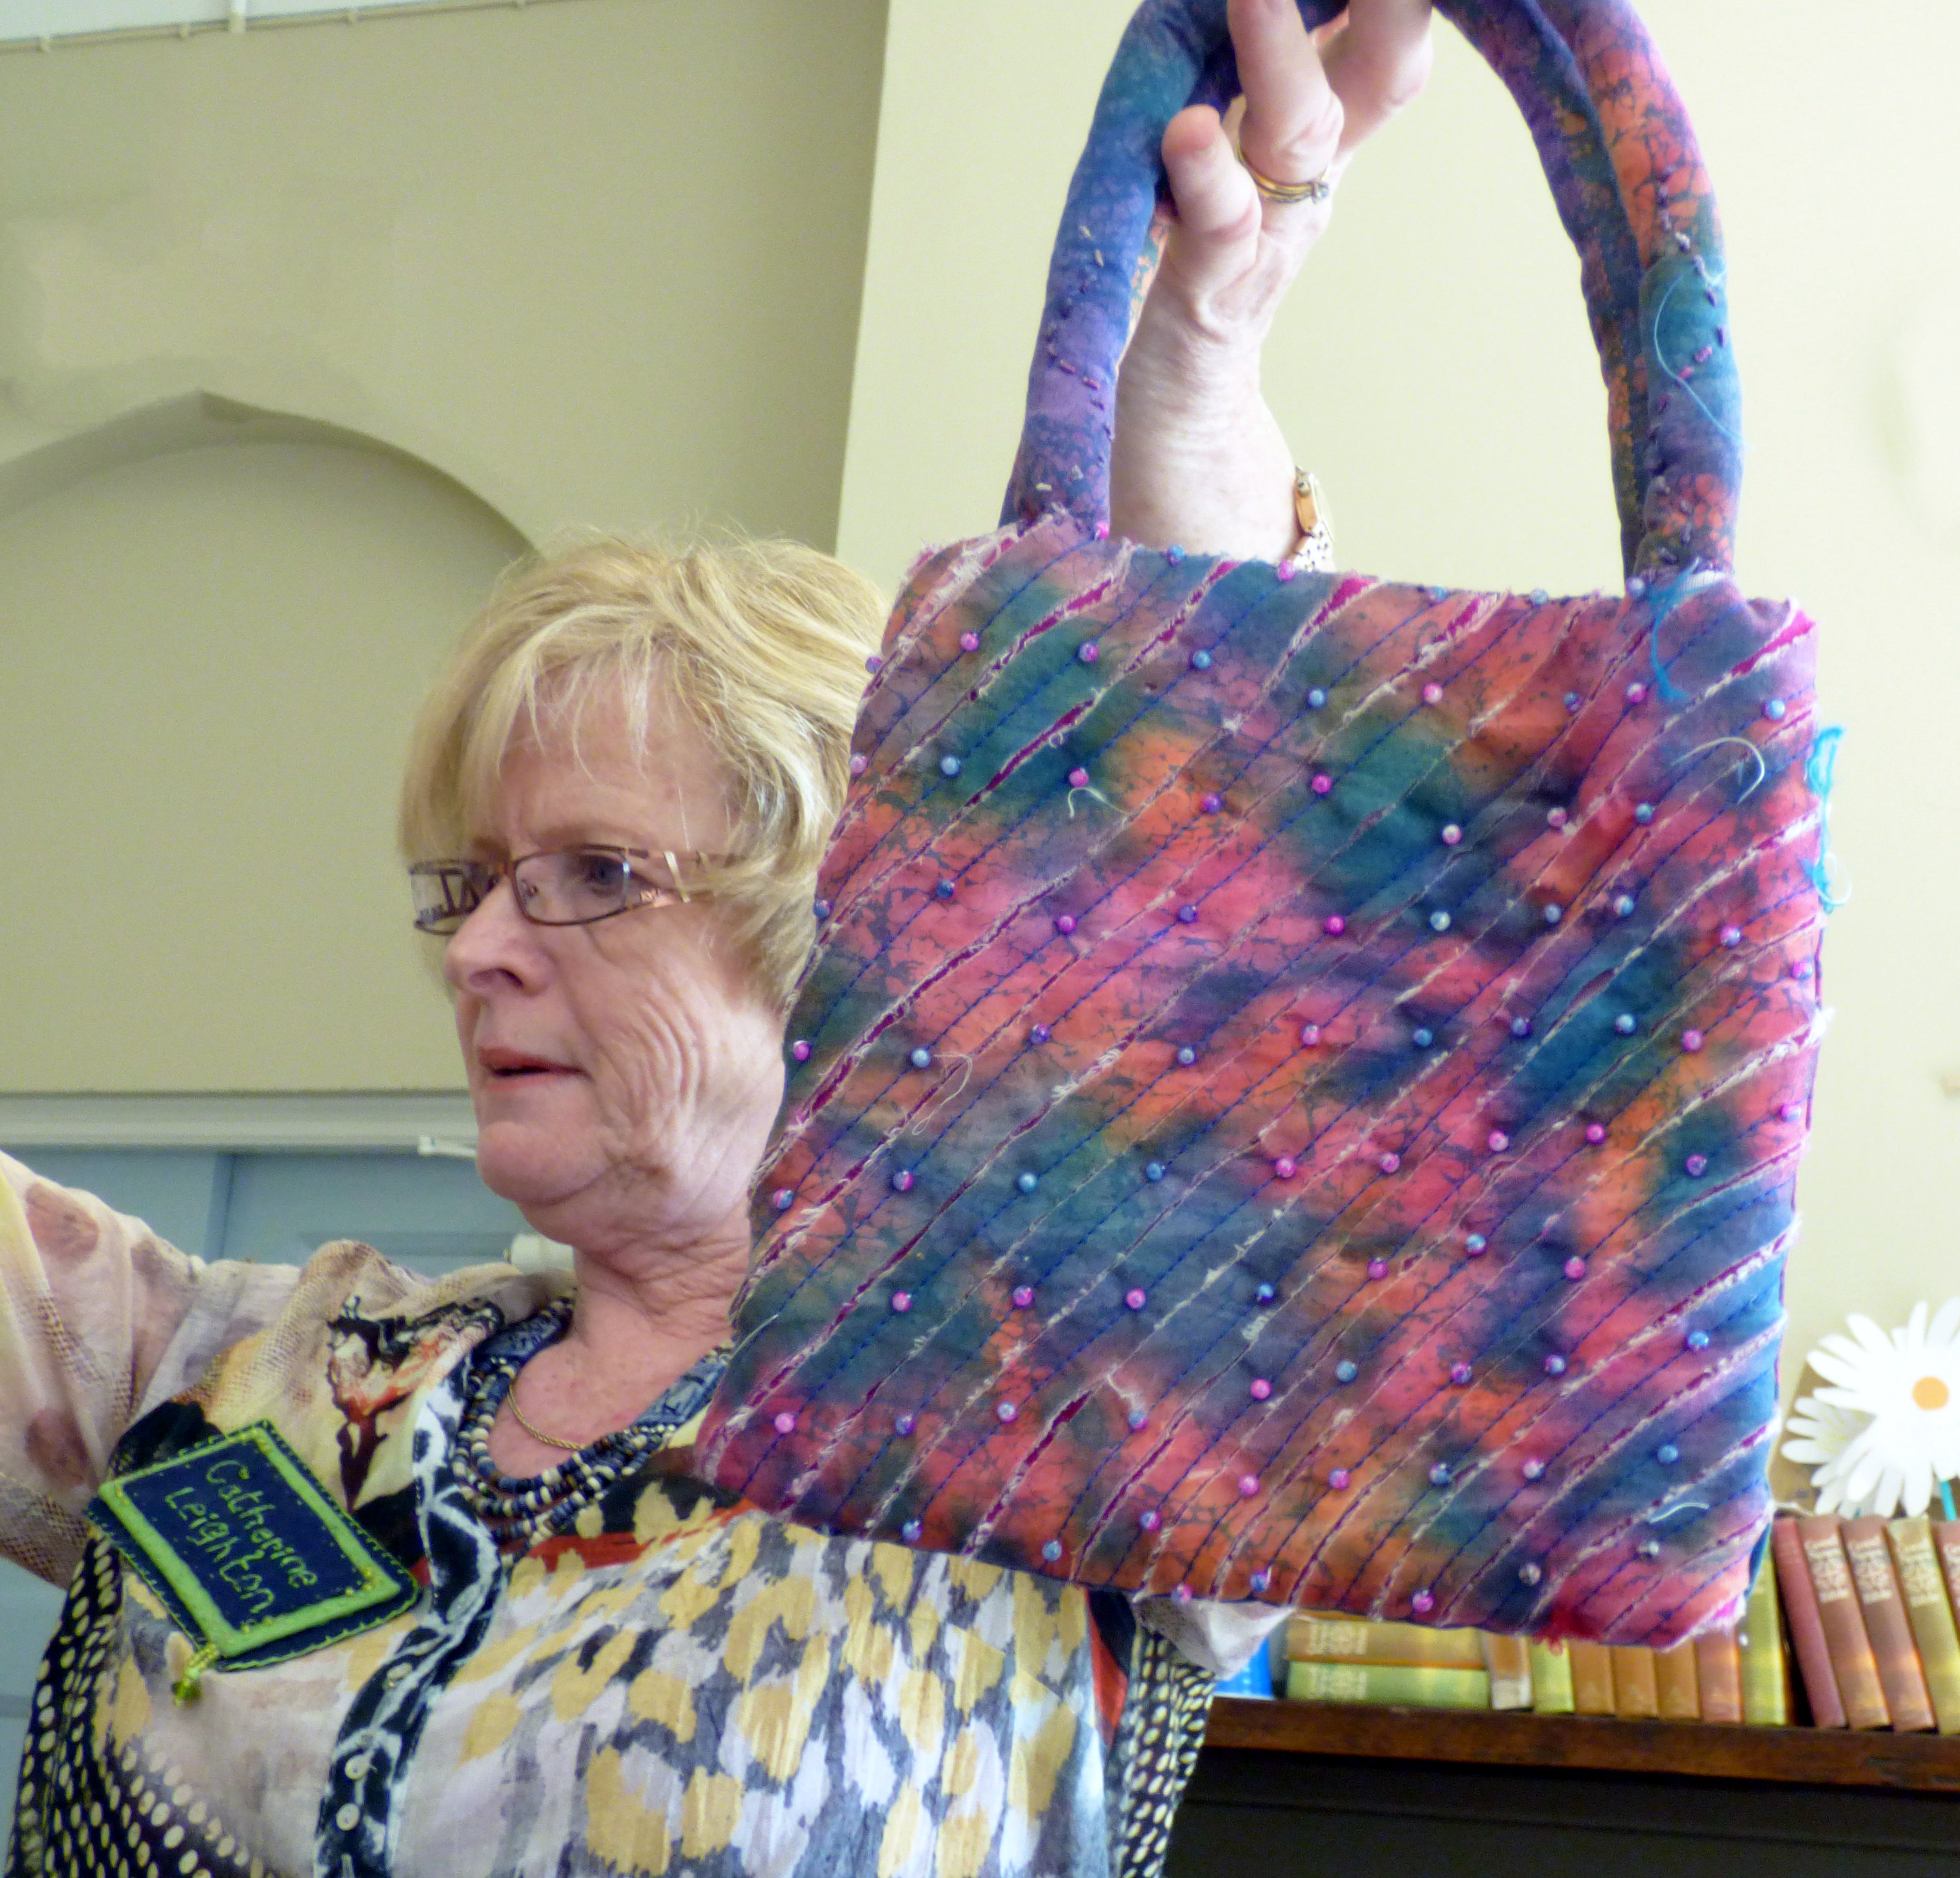 BAG by Catherine Leighton using African textiles